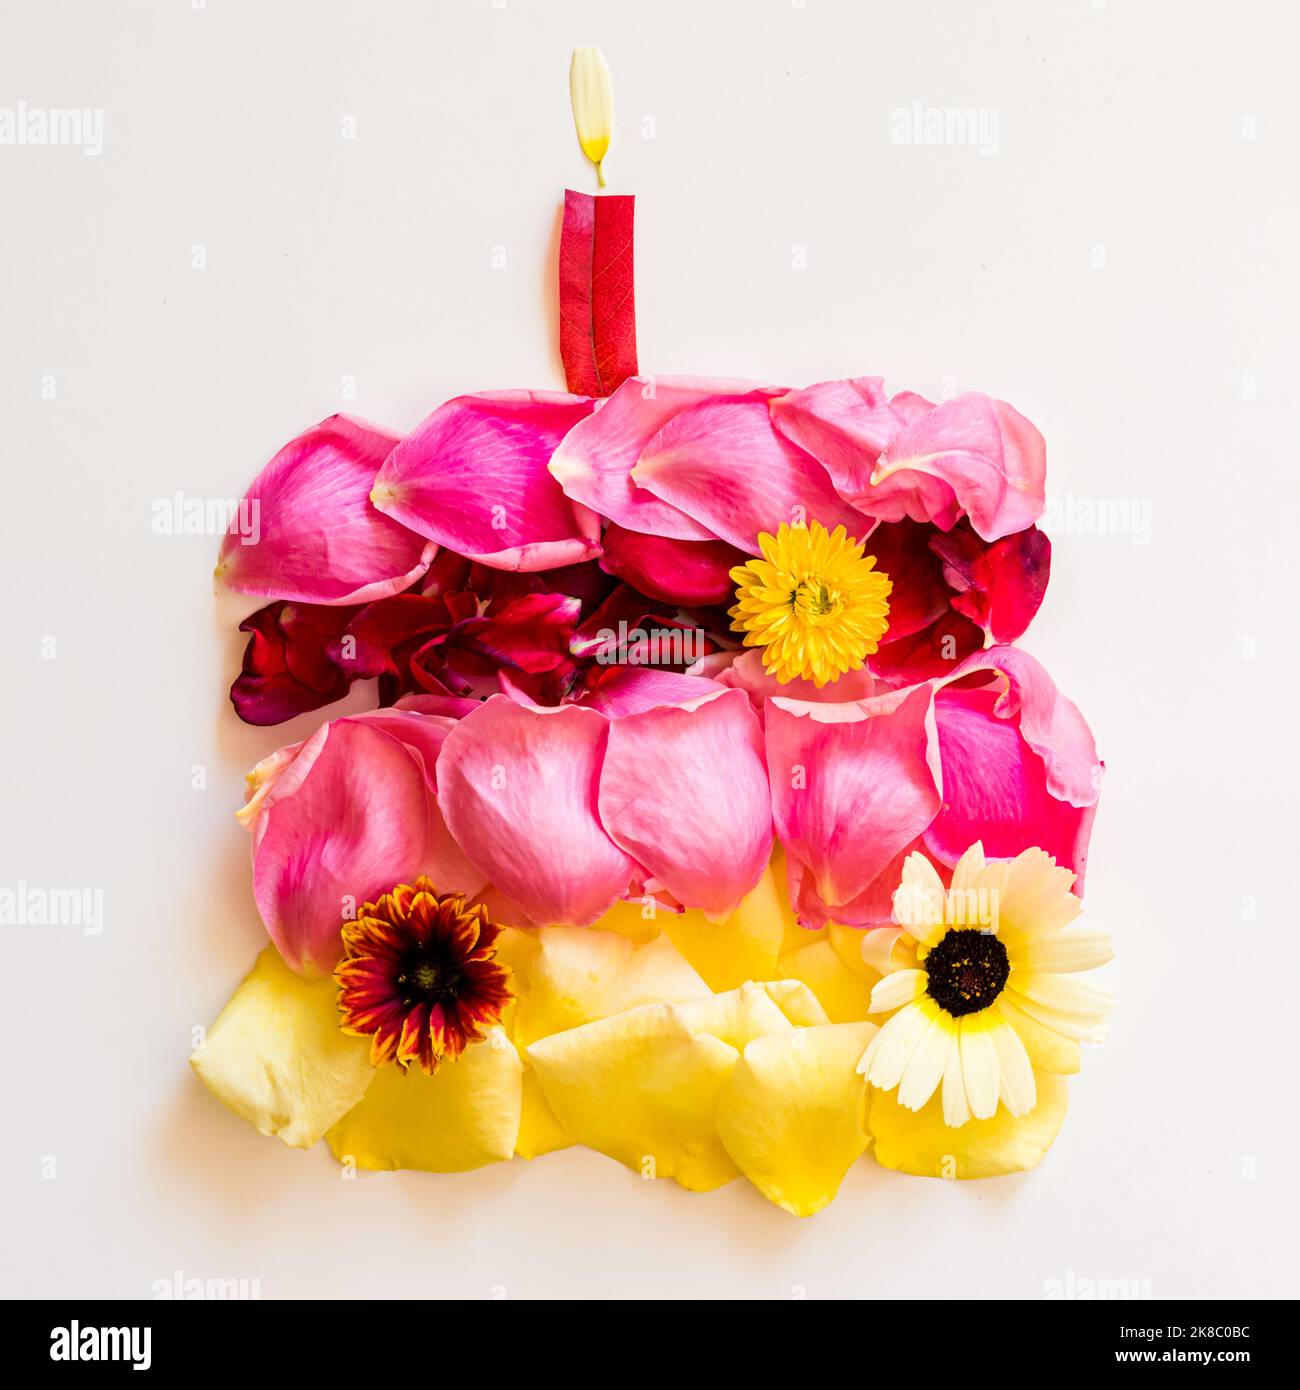 happy birthday cake made from rose petals and leaves Stock Photo